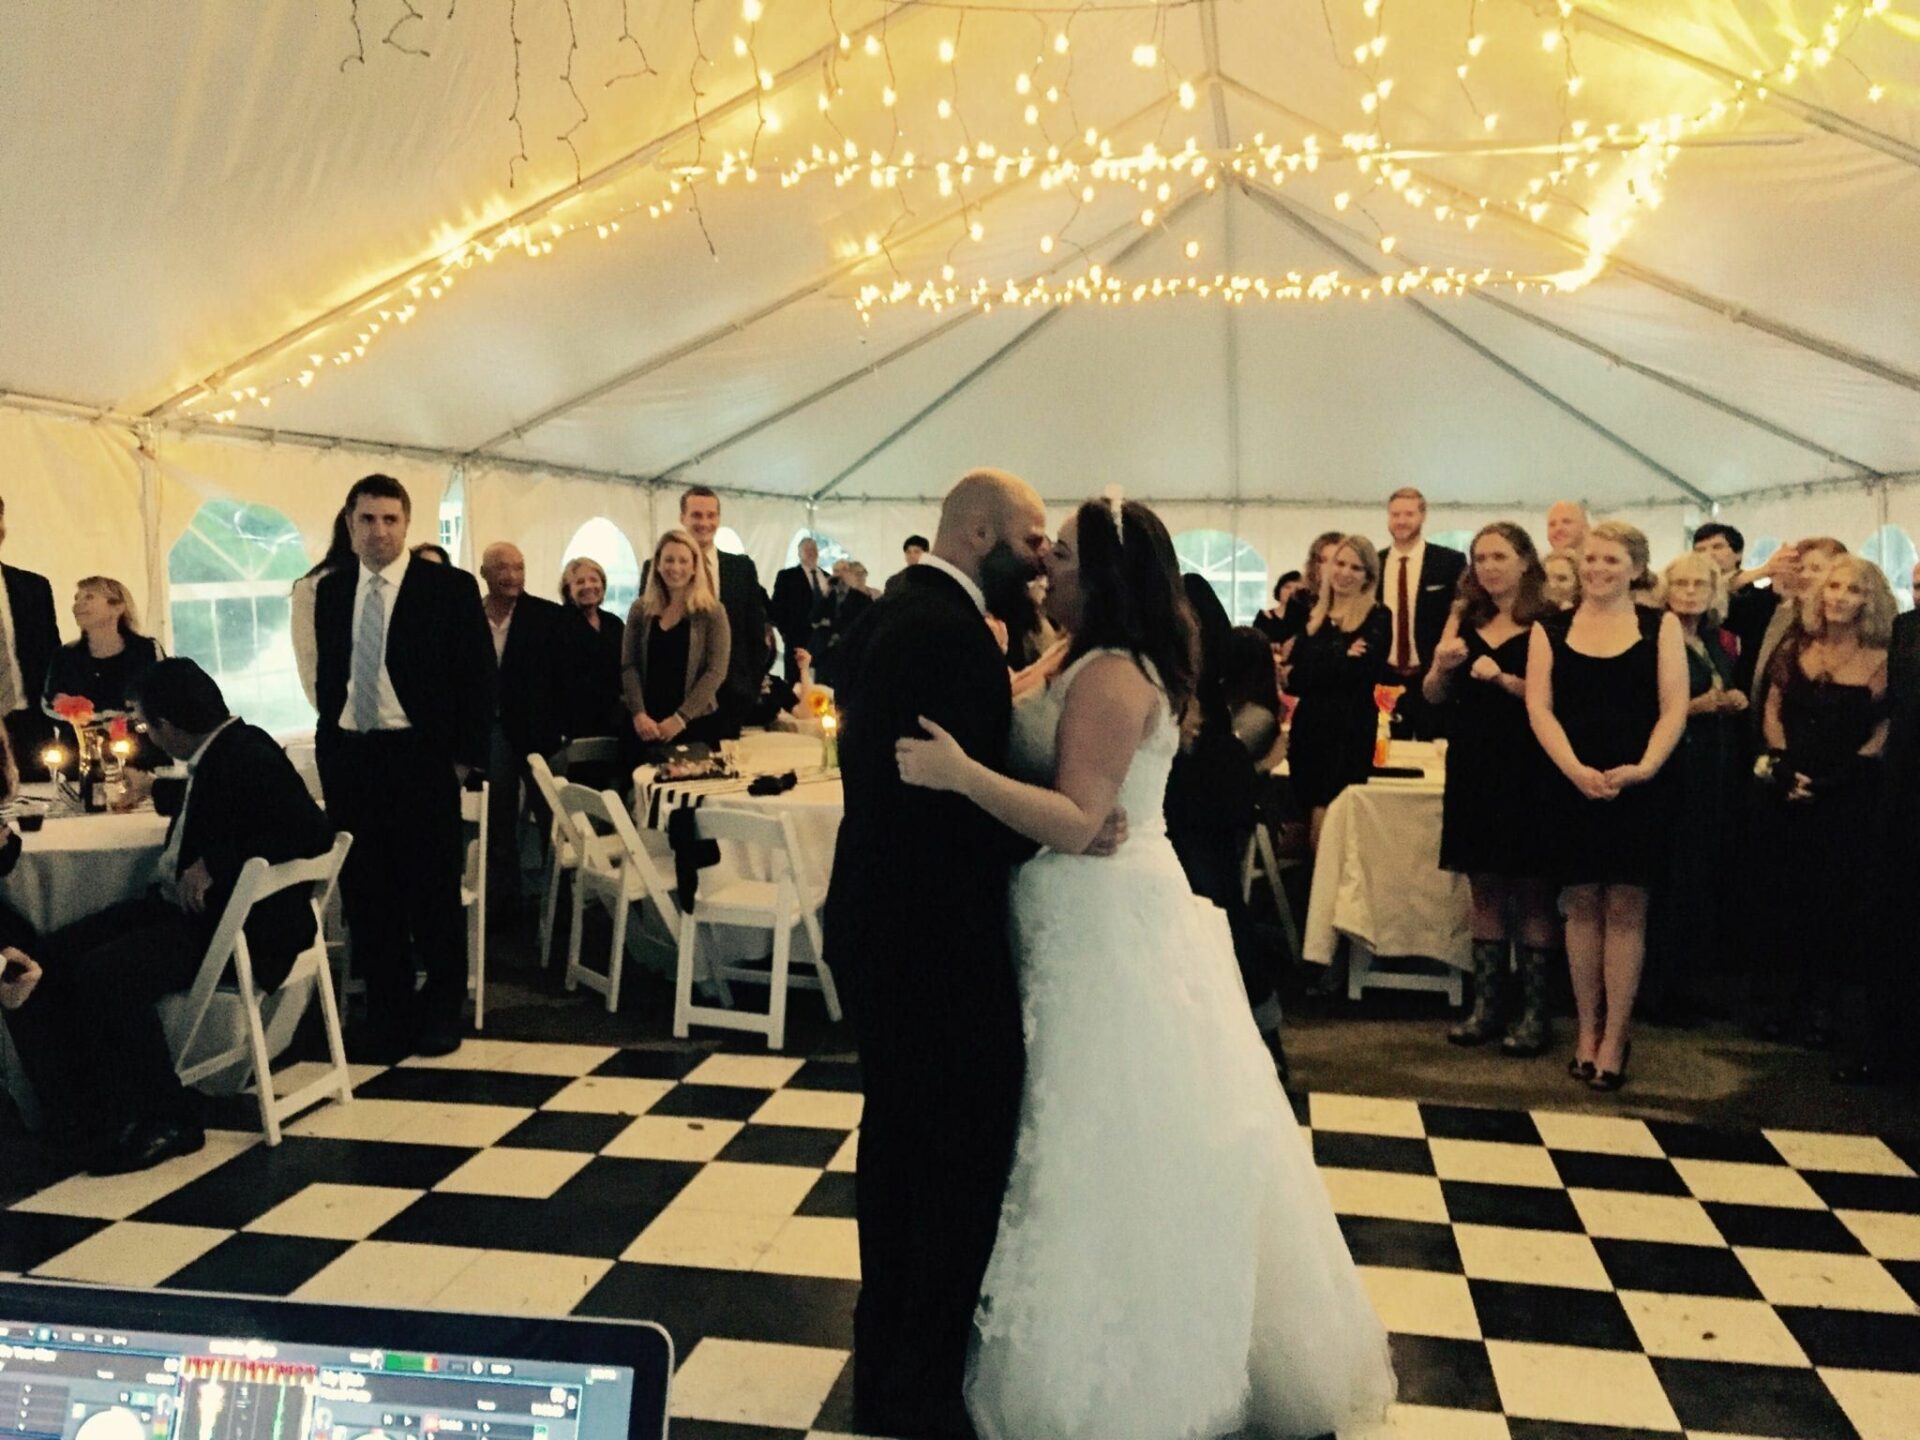 A bride and groom sharing their first dance with the accompaniment of a Wedding DJ in a tent.